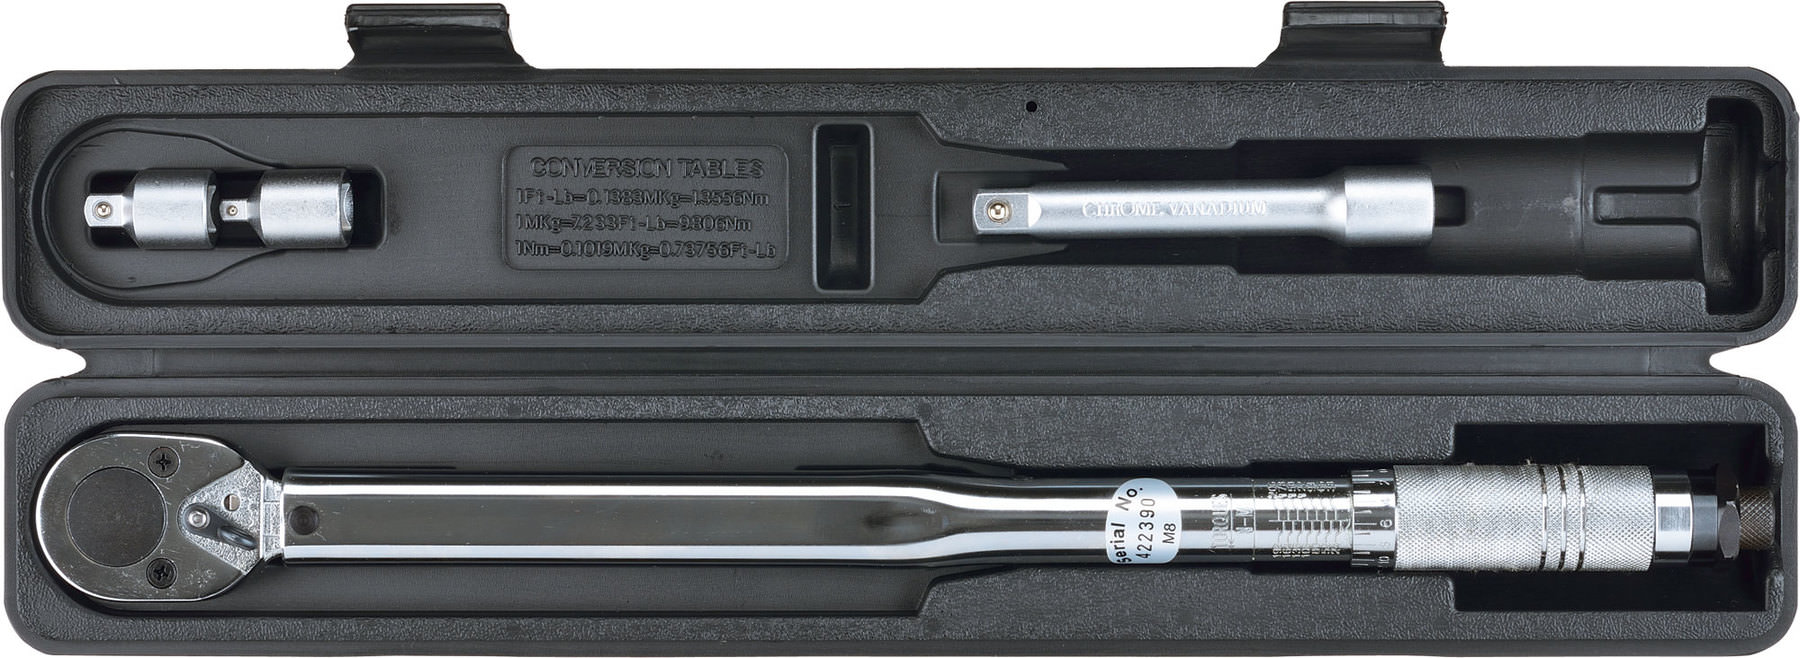 1/4" Drive Ratchet 2-24 Nm Torque Wrench Bicycle Bikes Repairing Hand Tool 